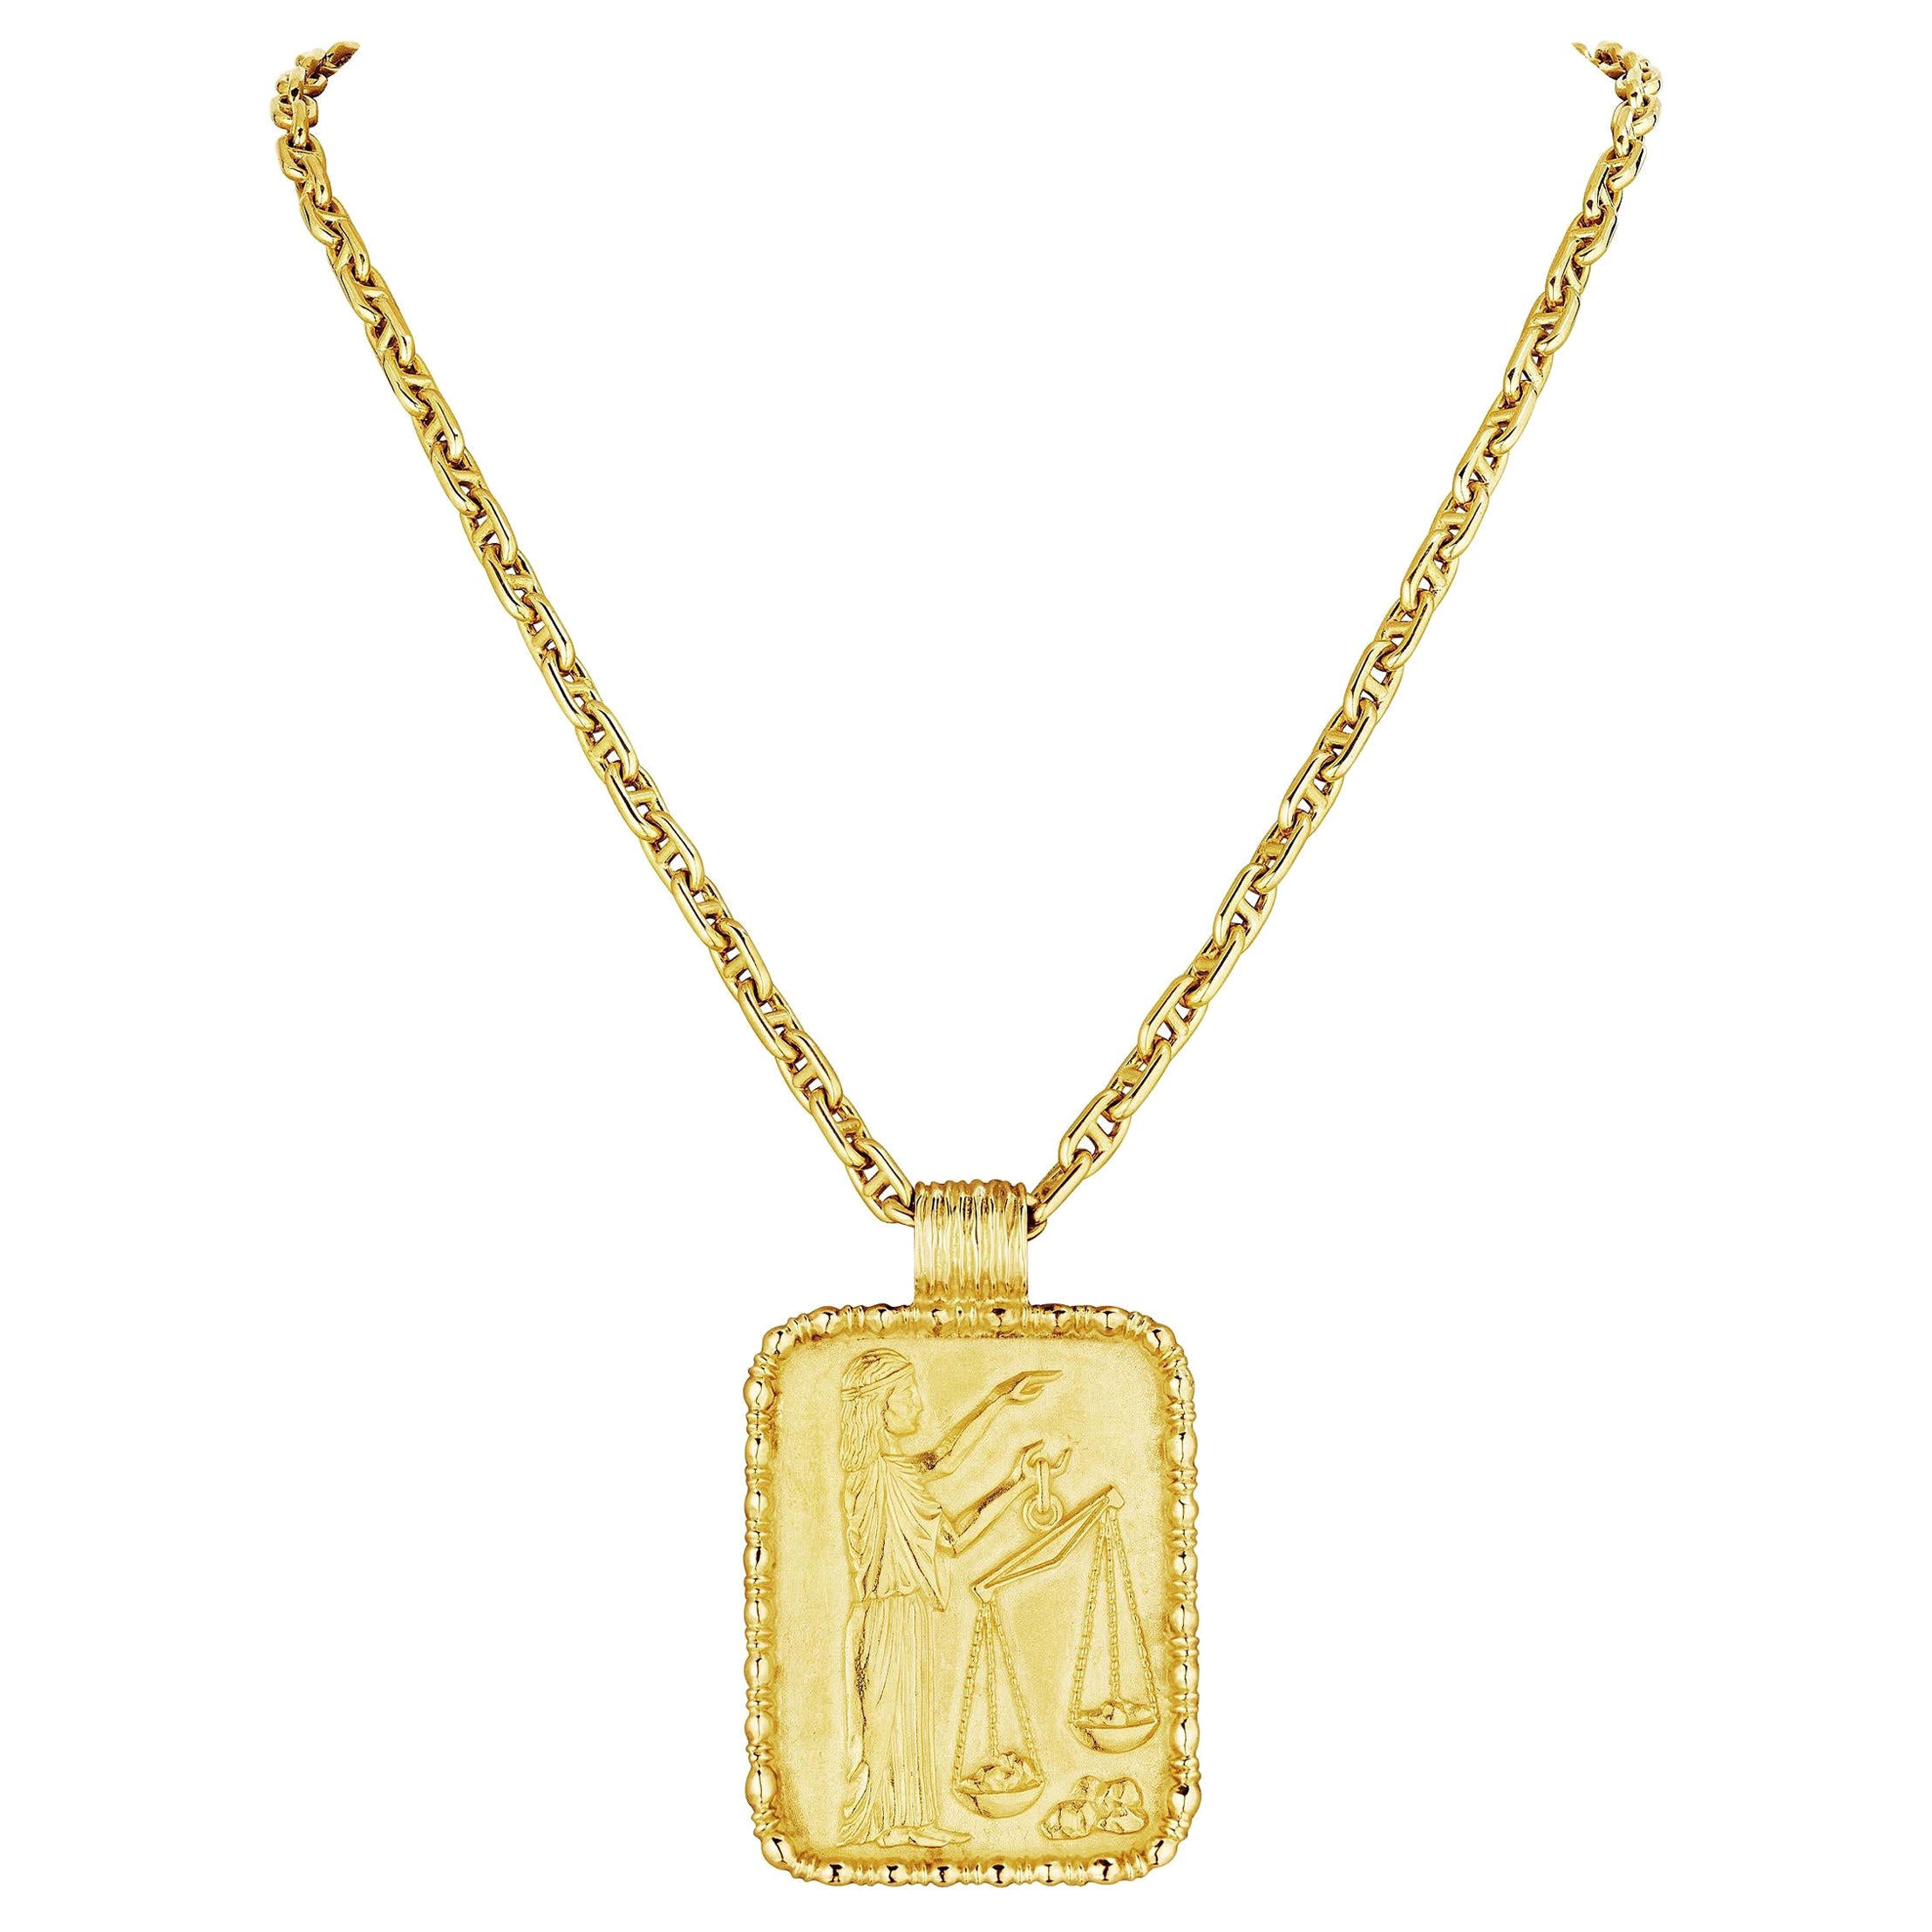 Fred Paris Force 10 Triple Nautical Cable Necklace in 18 kt Yellow